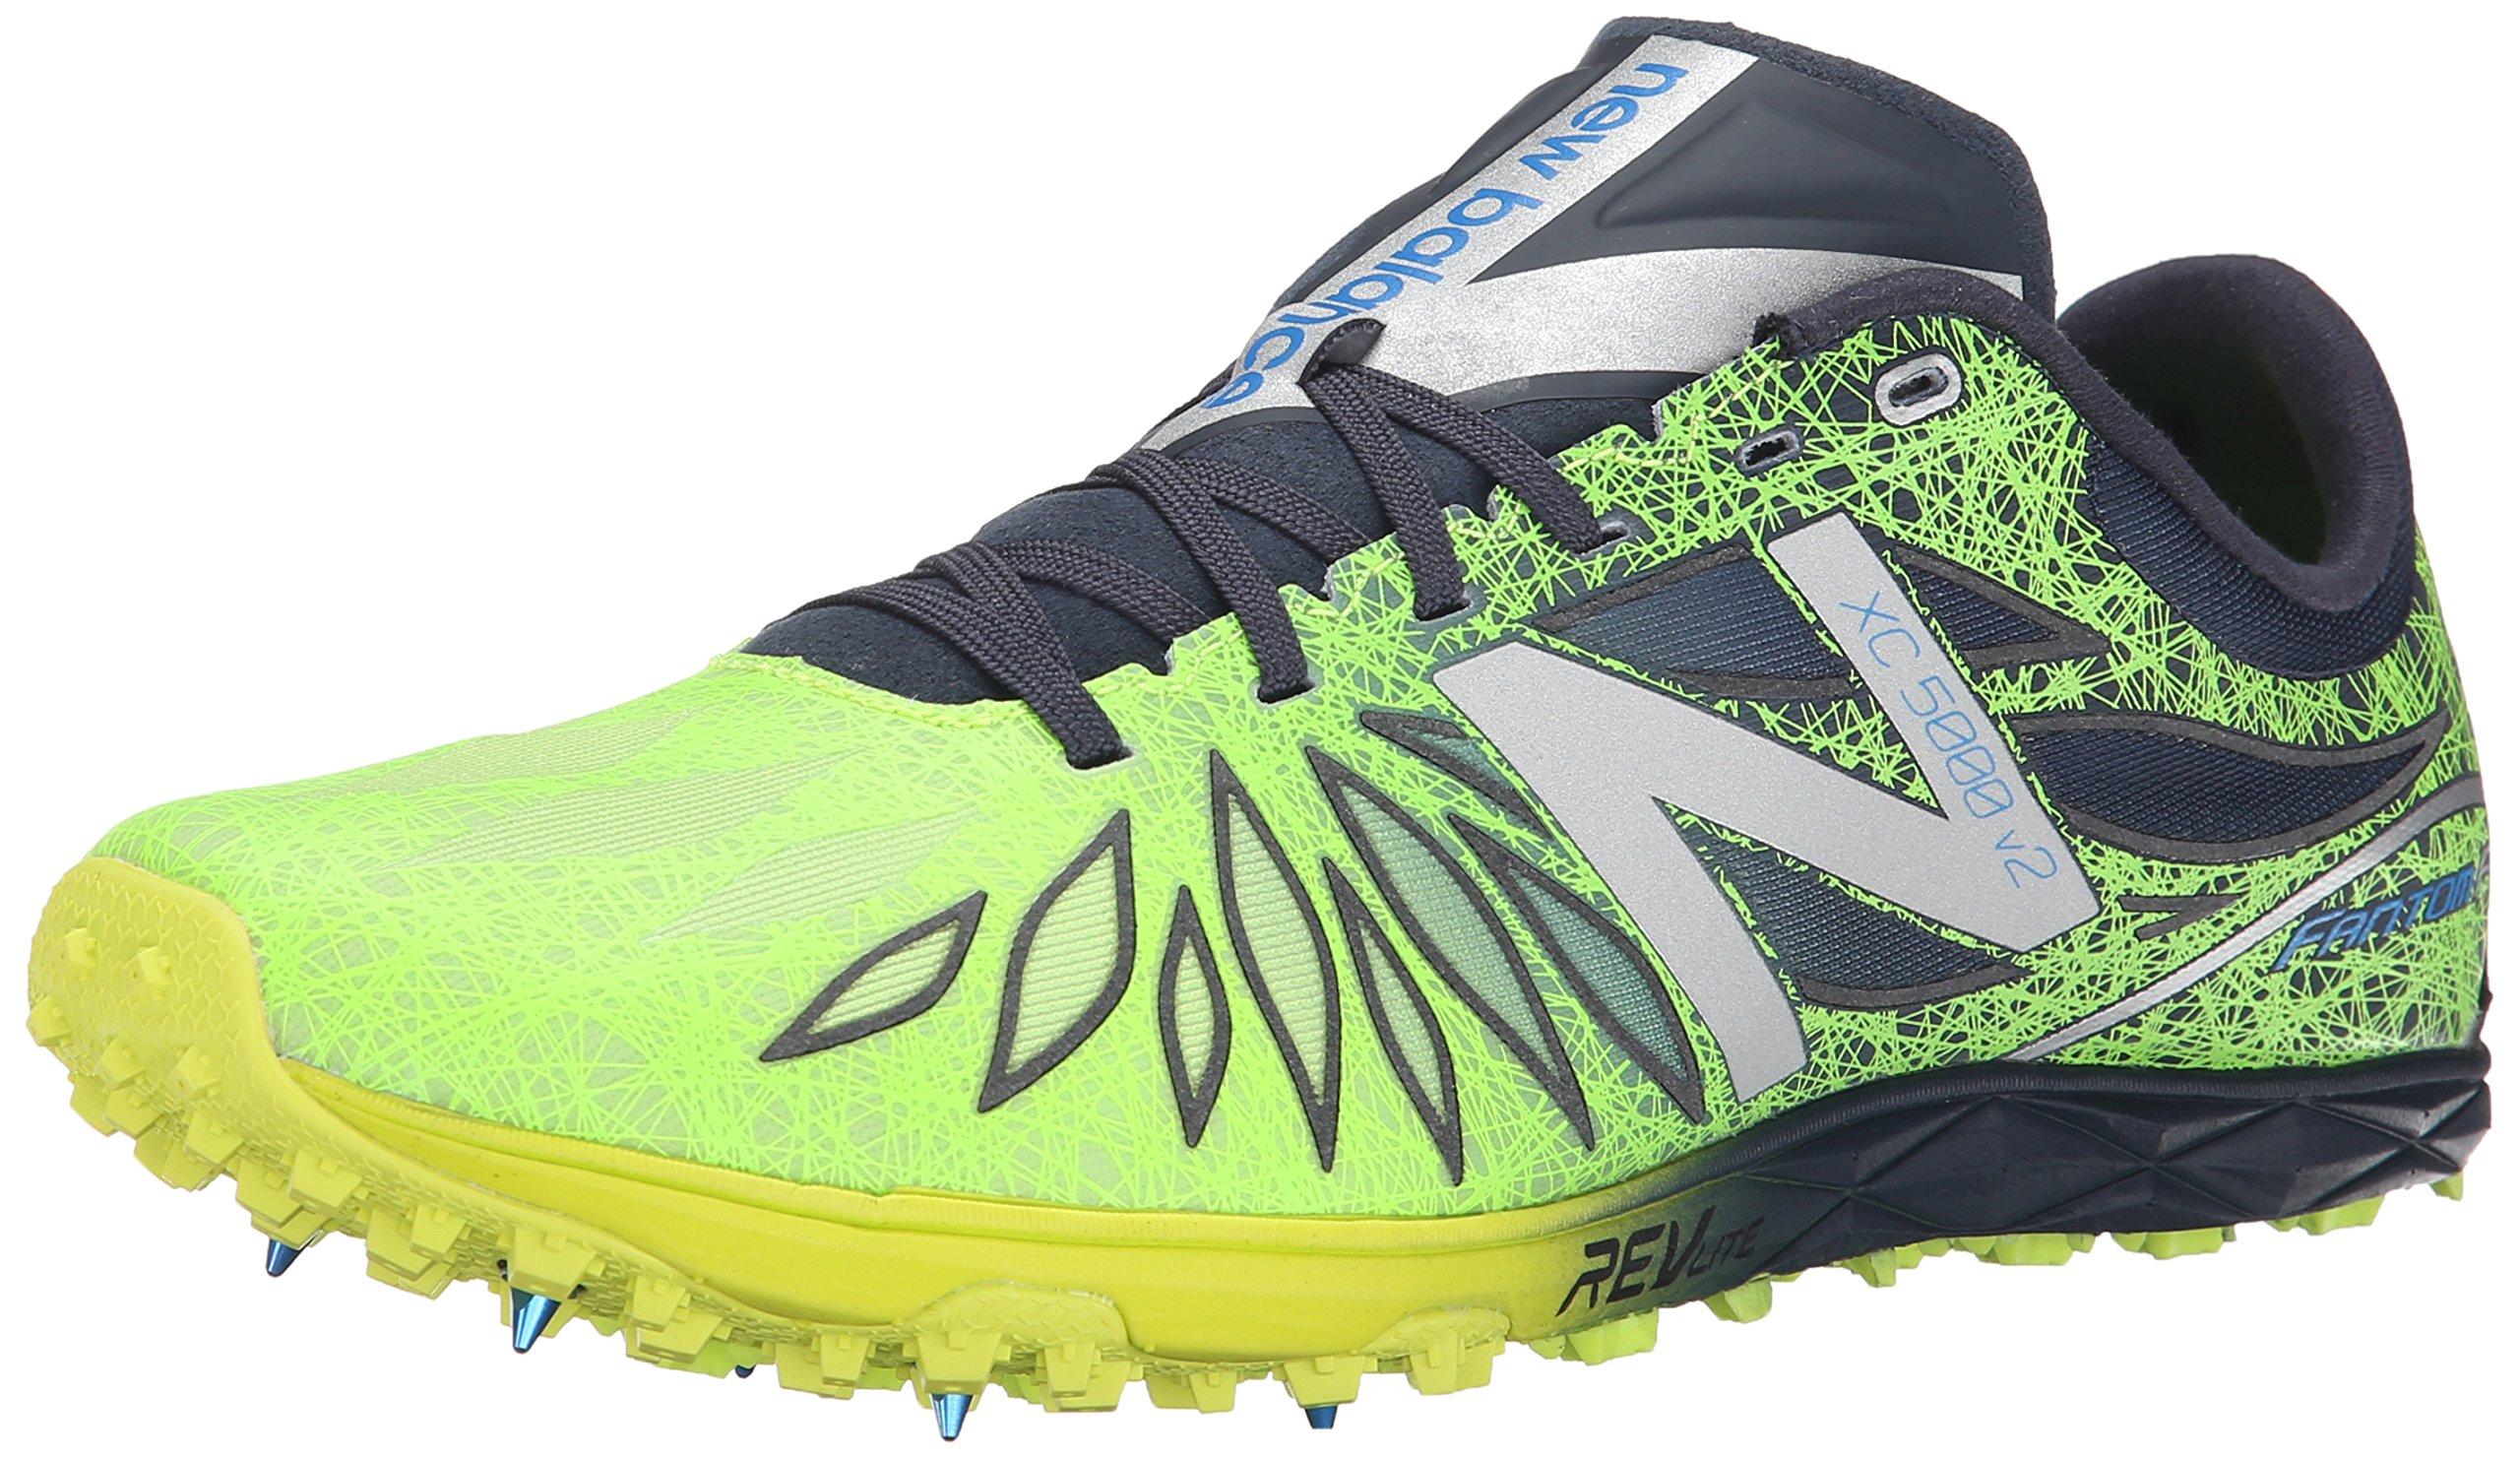 New Balance Cross Country 5000 V2 Spike Running Shoe in Yellow/Black  (Green) for Men | Lyst